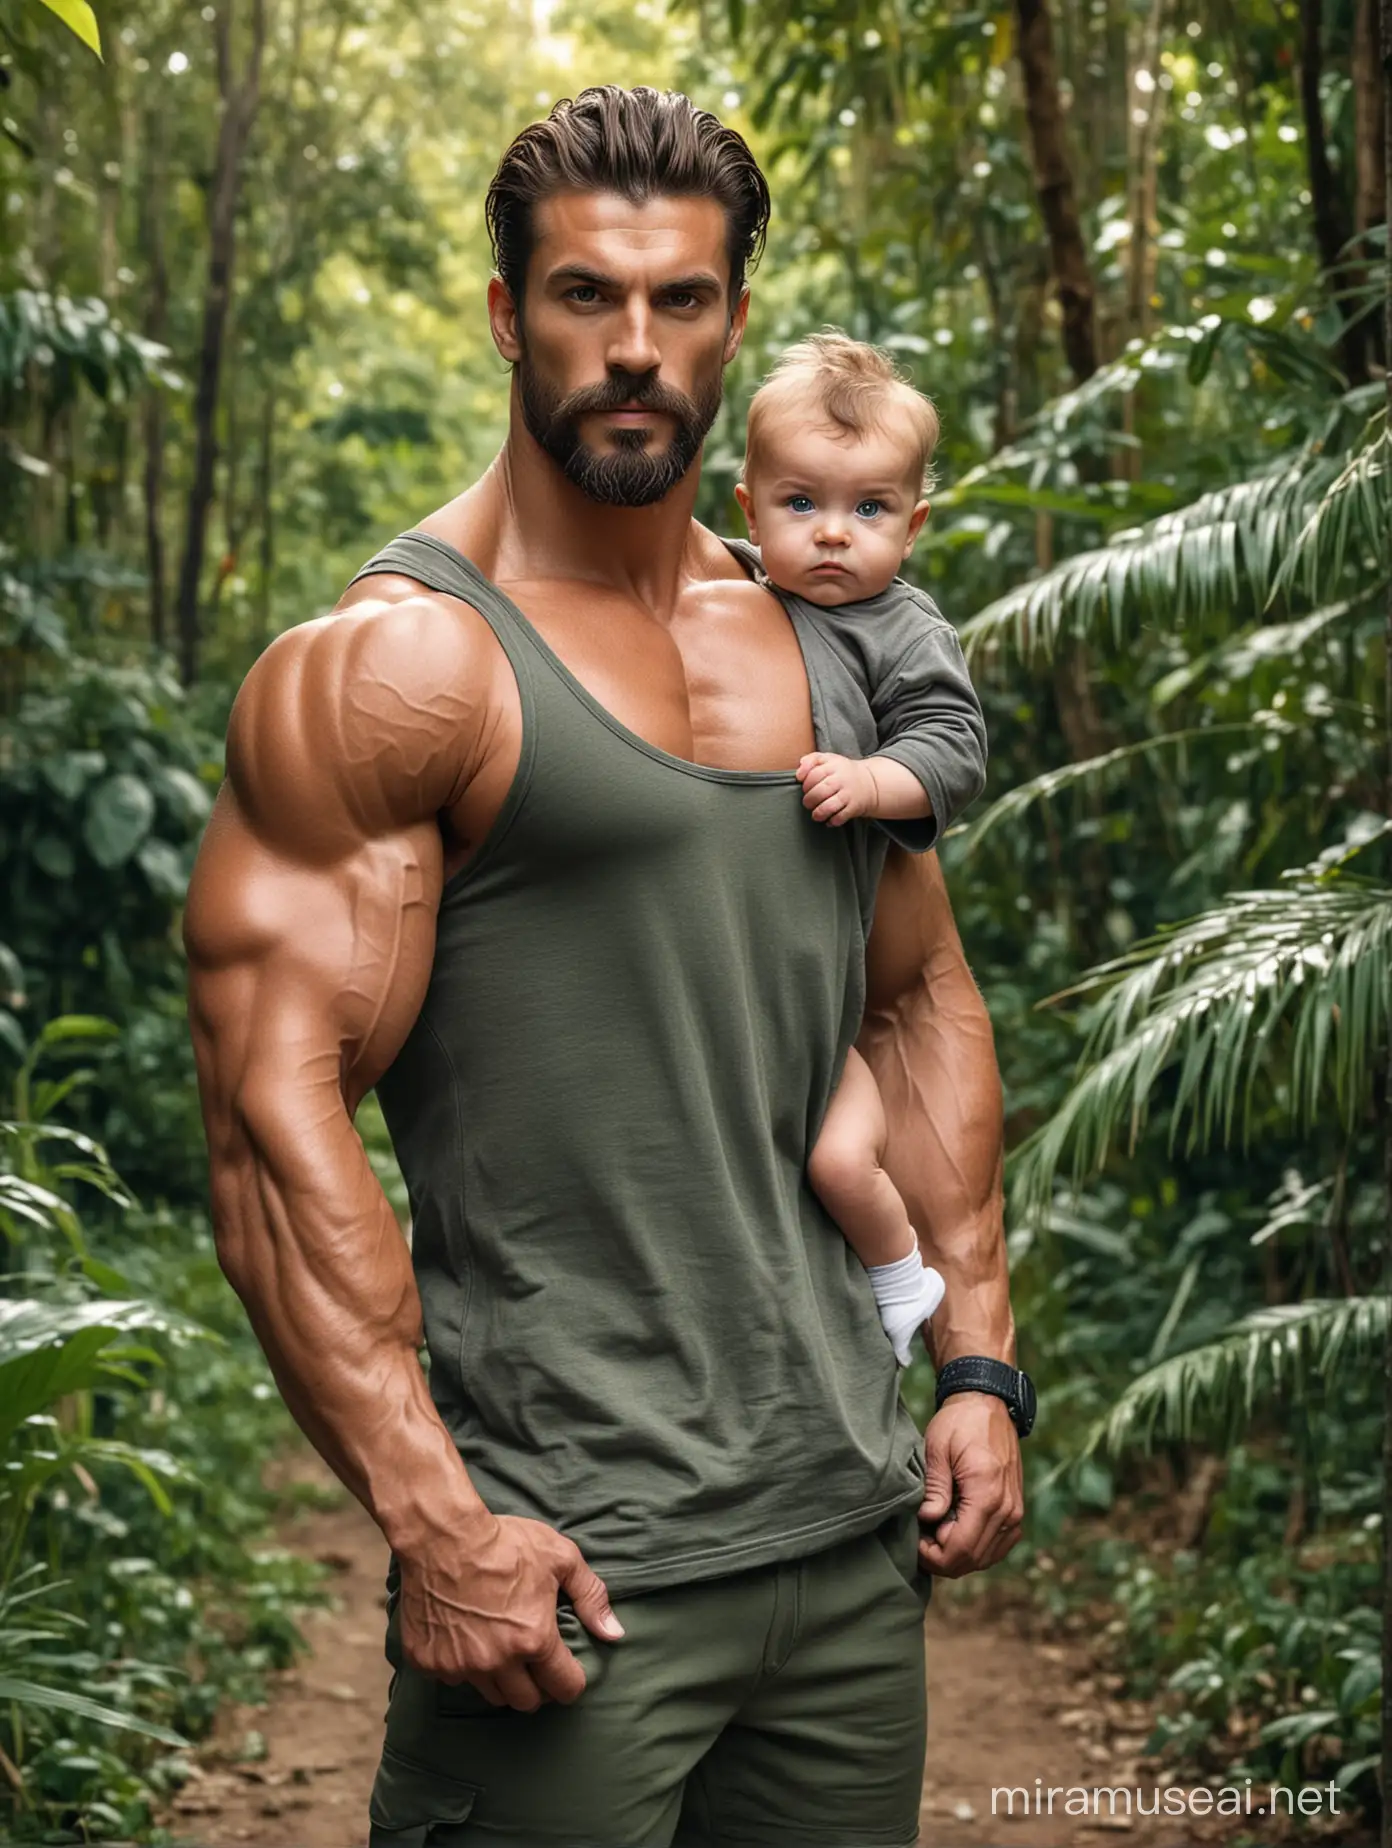 Muscular Father Embracing Infant in Dense Jungle Setting